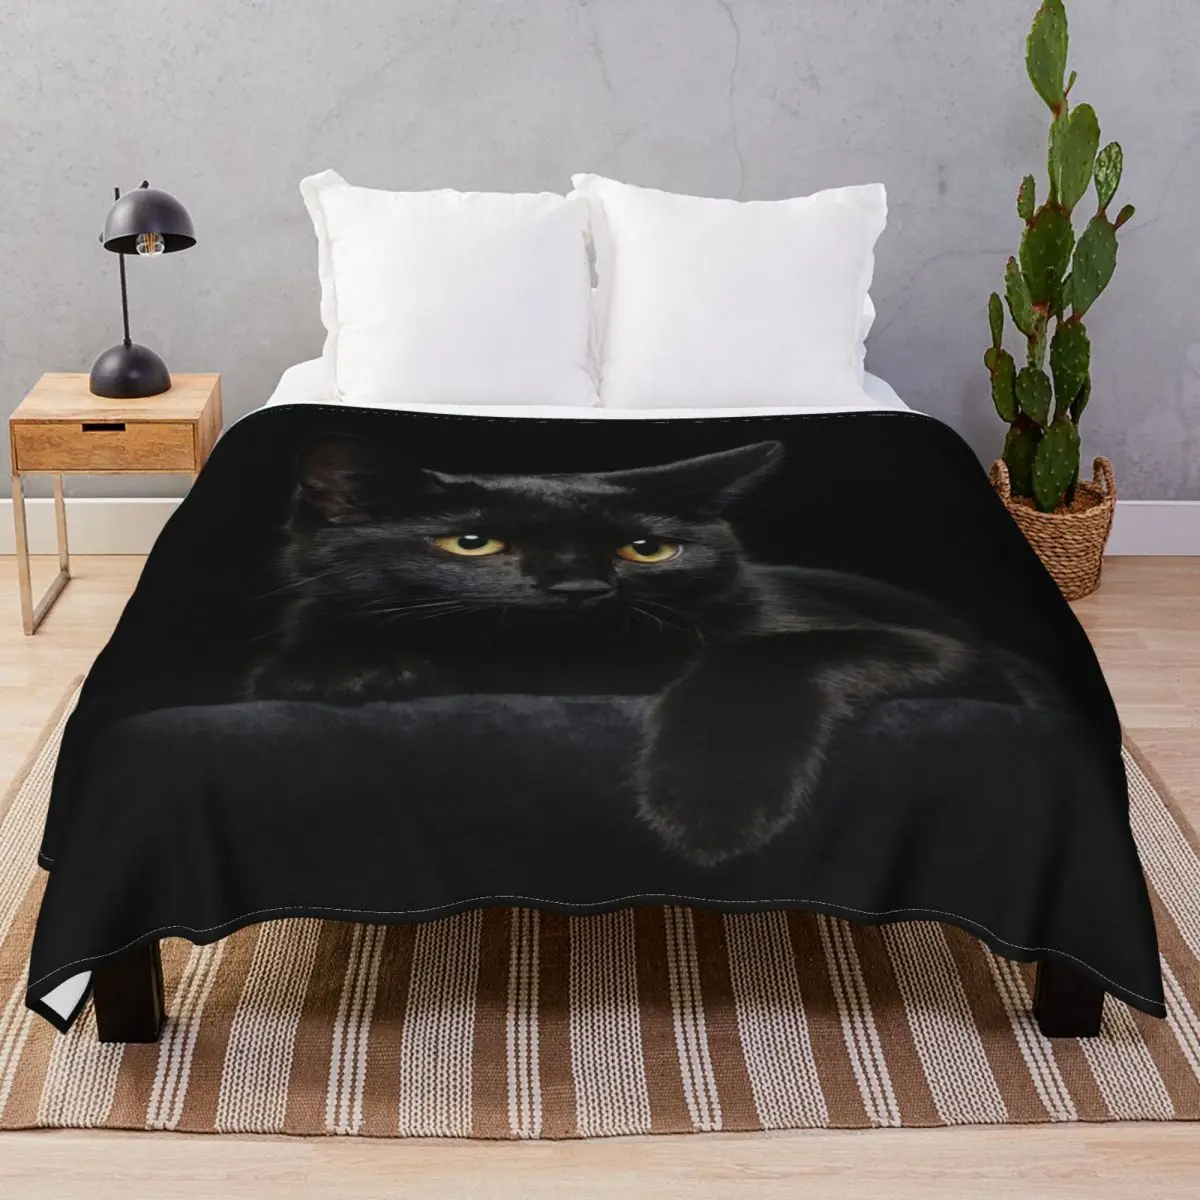 

Black Cat Blanket Fleece Spring/Autumn Ultra-Soft Throw Blankets for Bed Home Couch Travel Cinema